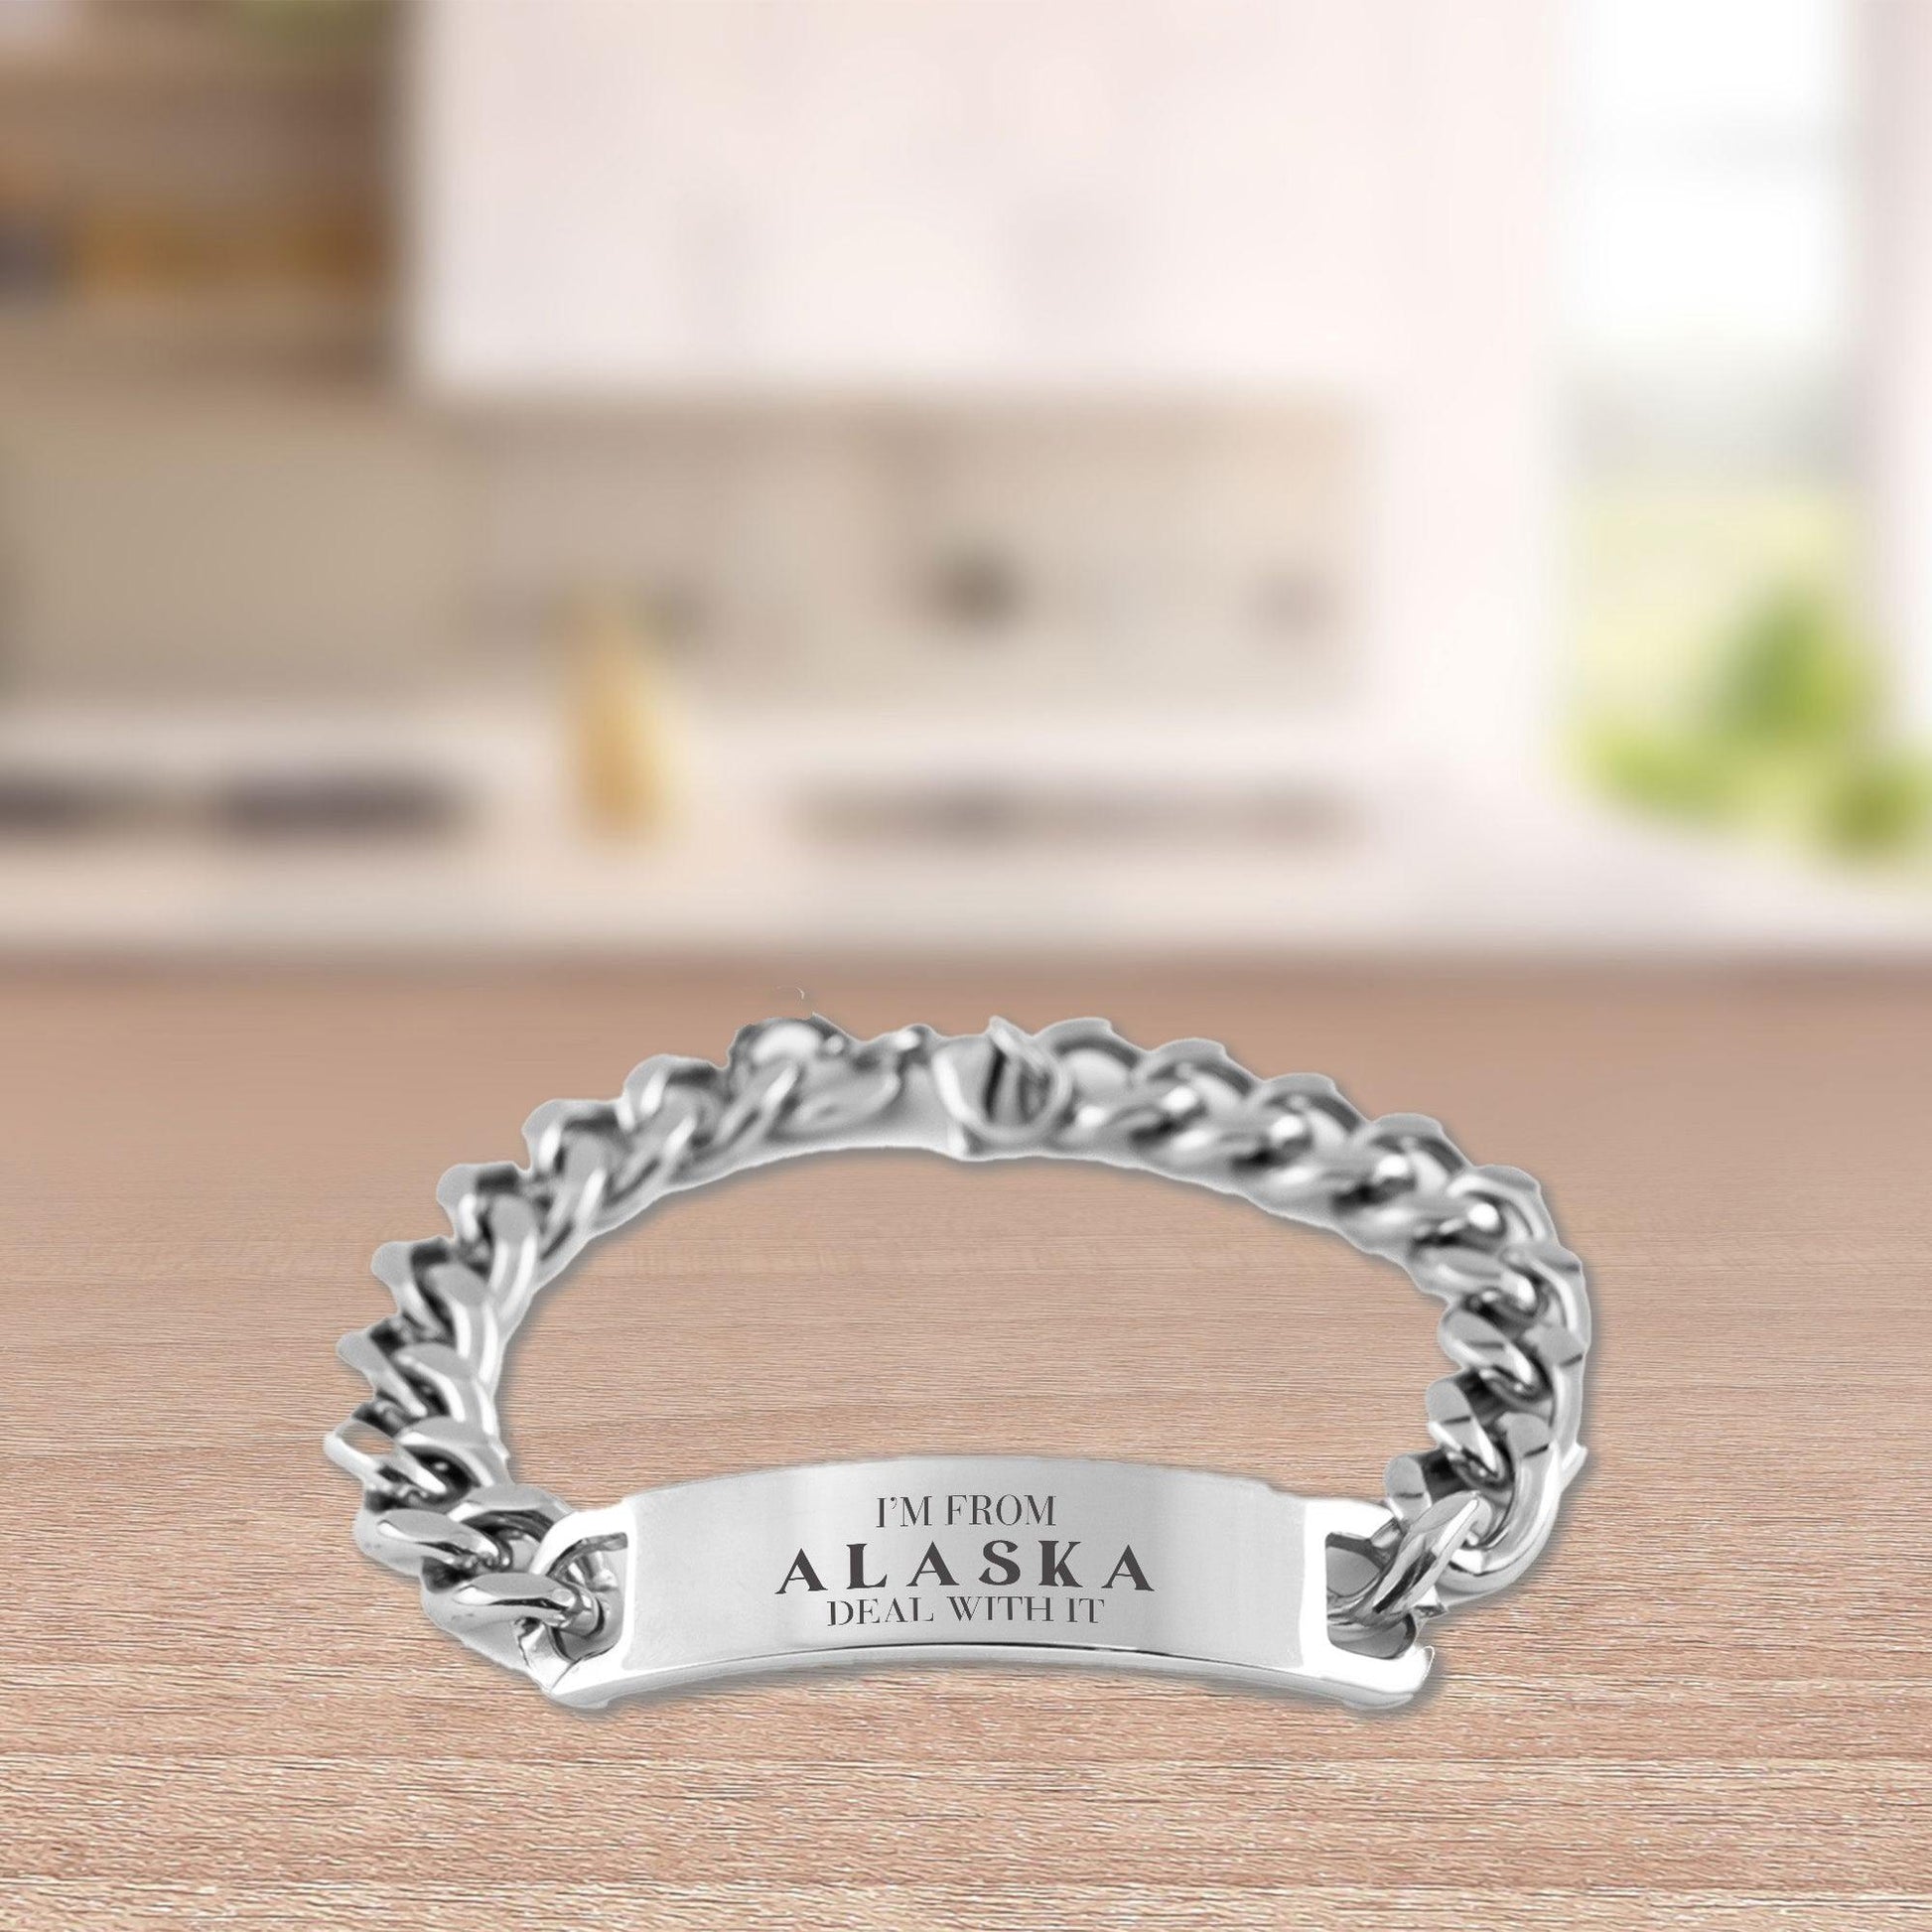 I'm from Alaska, Deal with it, Proud Alaska State Gifts, Alaska Cuban Chain Stainless Steel Bracelet Gift Idea, Christmas Gifts for Alaska People, Coworkers, Colleague - Mallard Moon Gift Shop